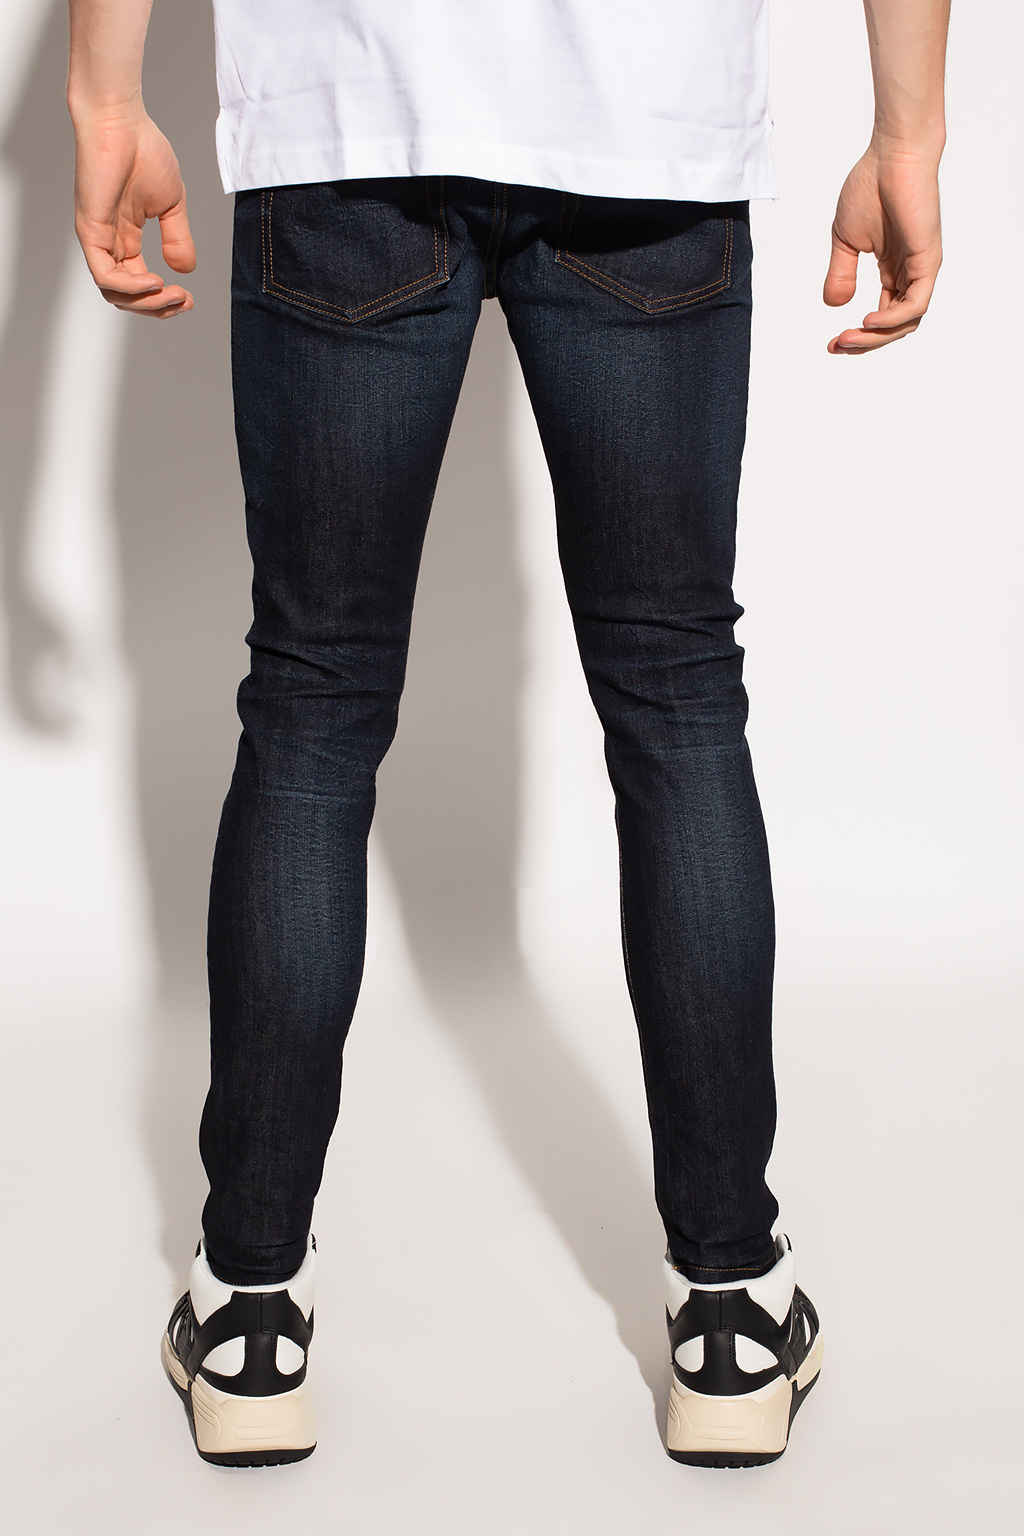 Diesel ‘D-Amny’ jeans with logo